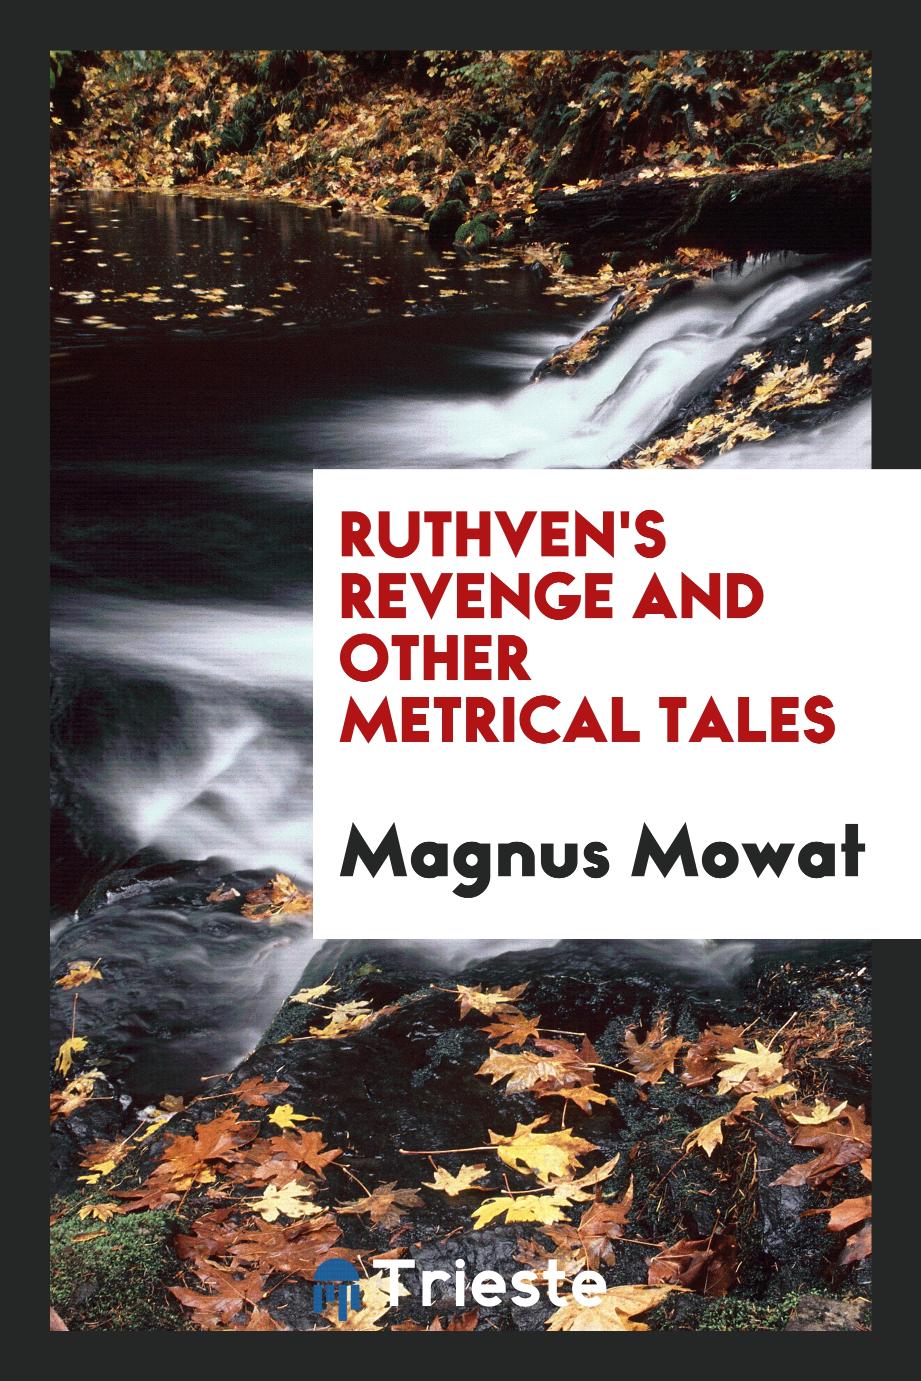 Ruthven's revenge and other metrical tales